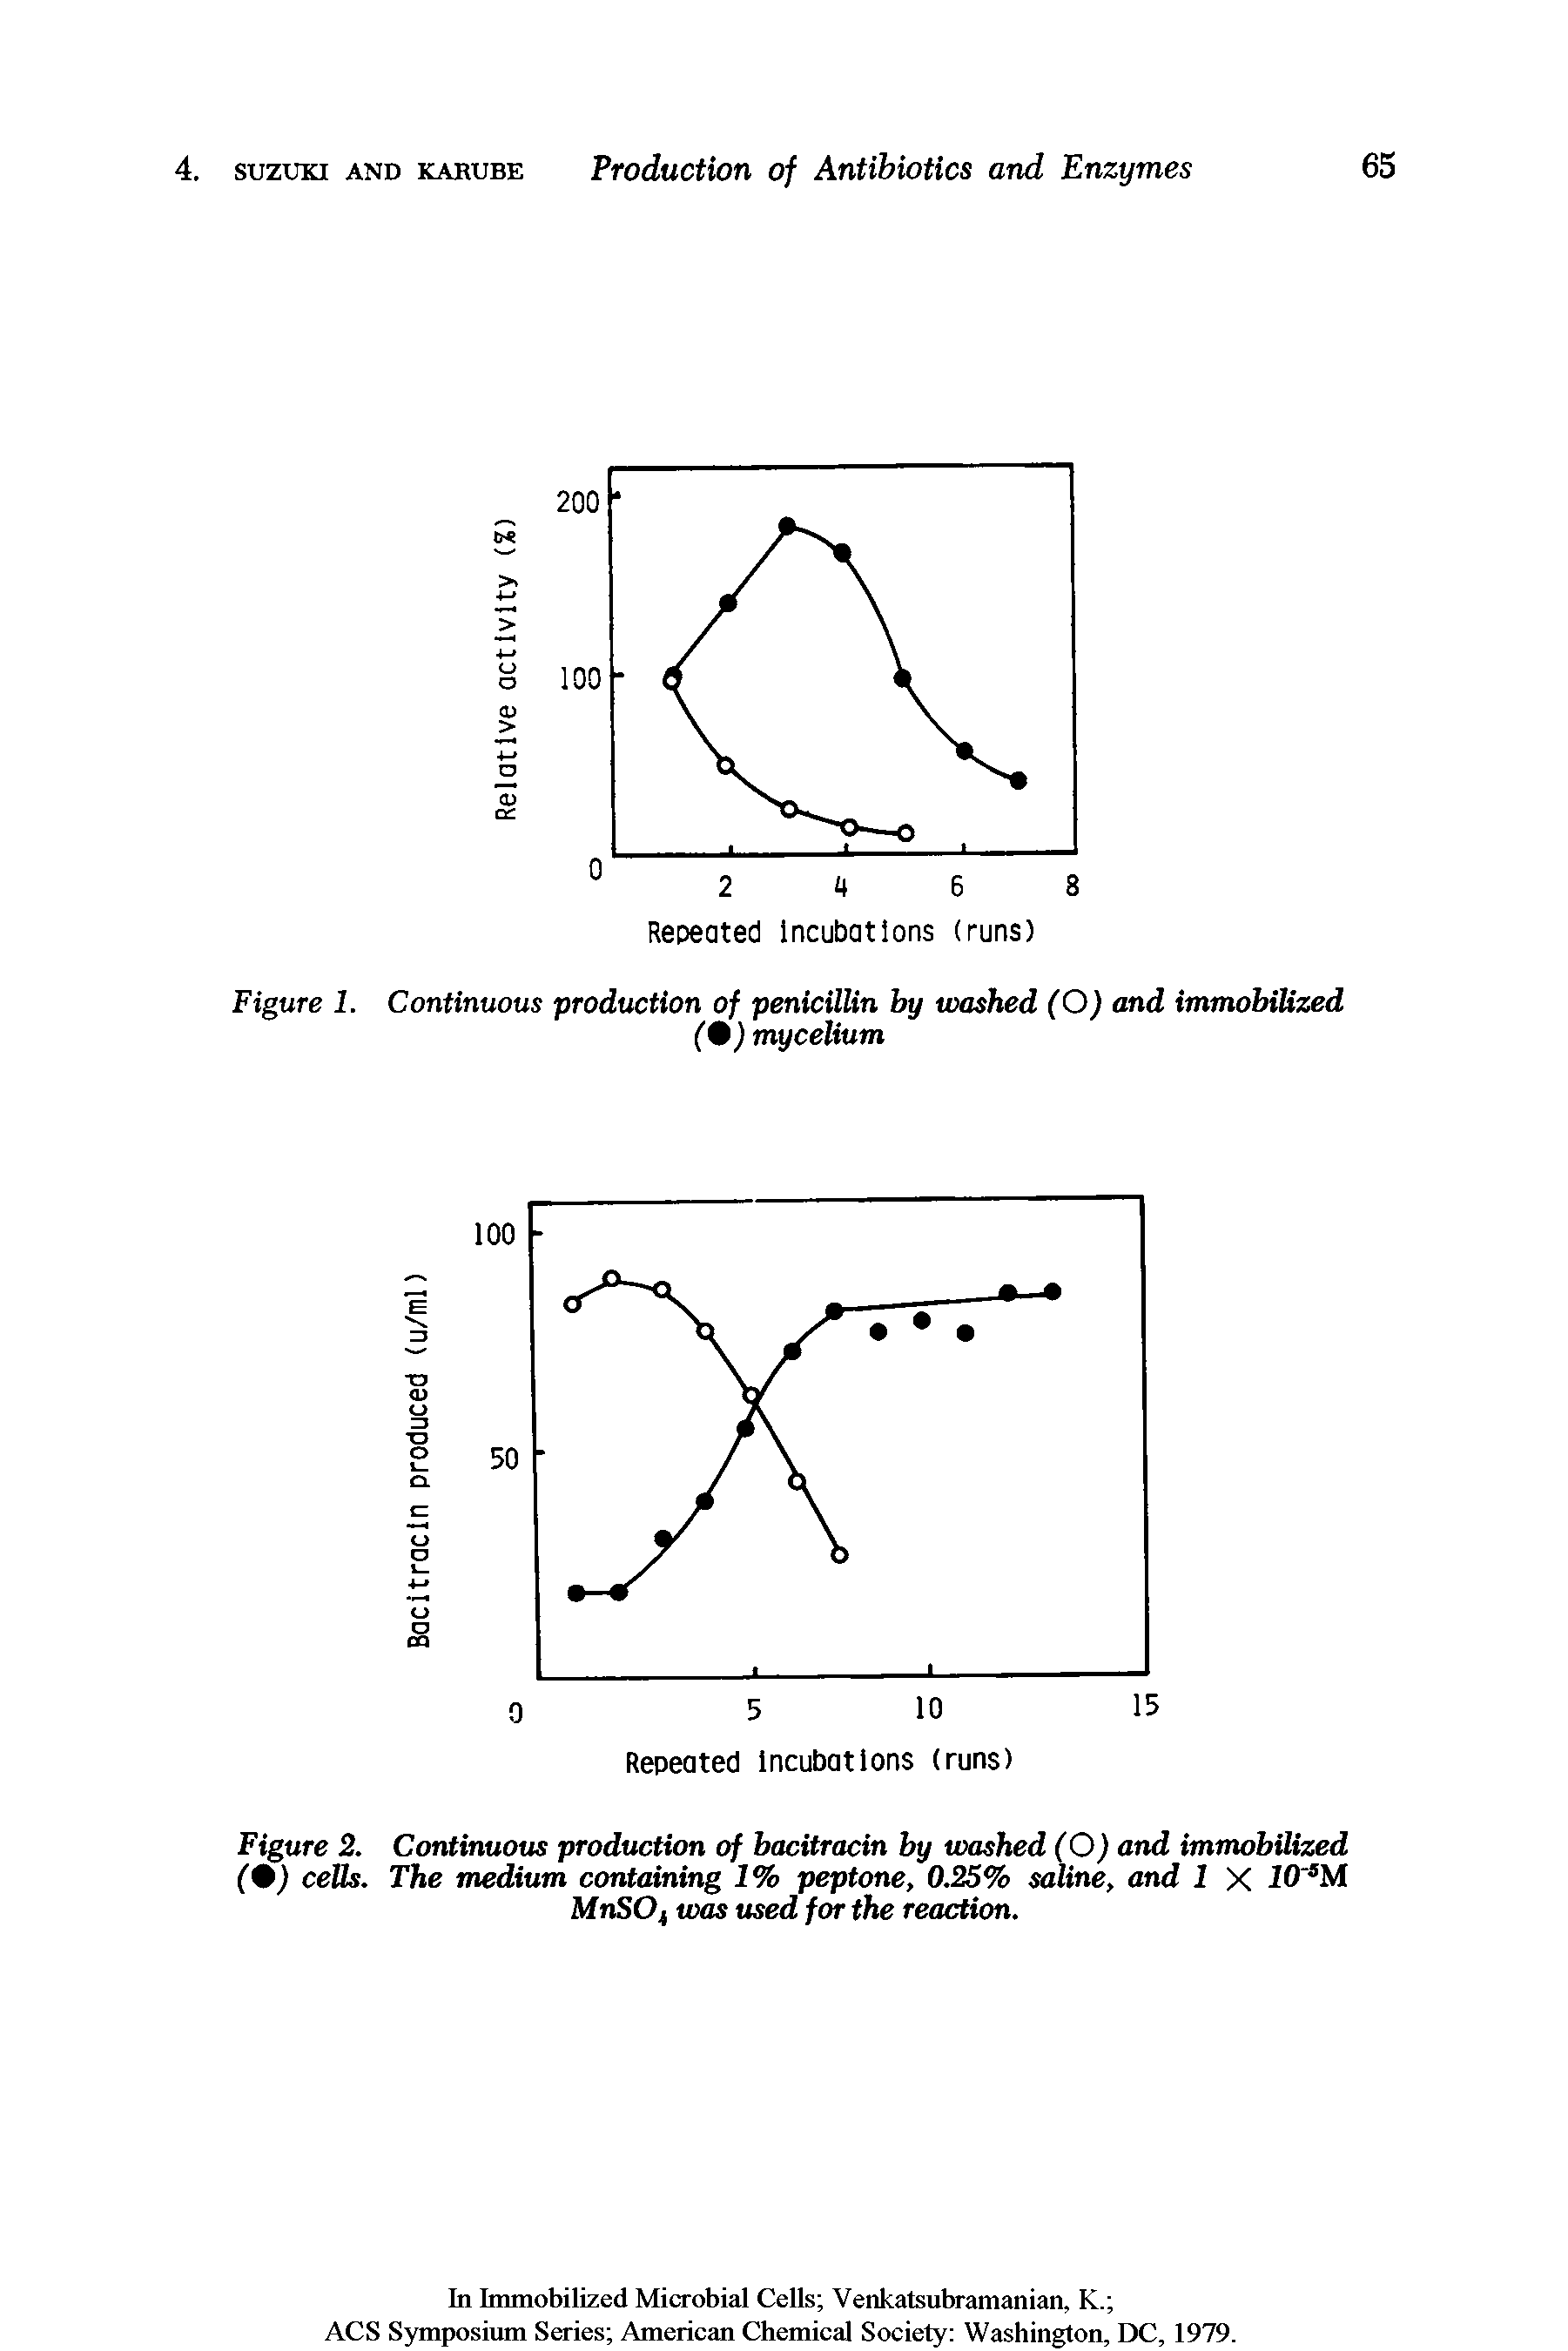 Figure 2. Continuous production of bacitracin by washed (O) and immobilized (9) cells. The medium containing 1% peptone, 0.25% saline, and 1 X iO M MnSOf was used for the reaction.